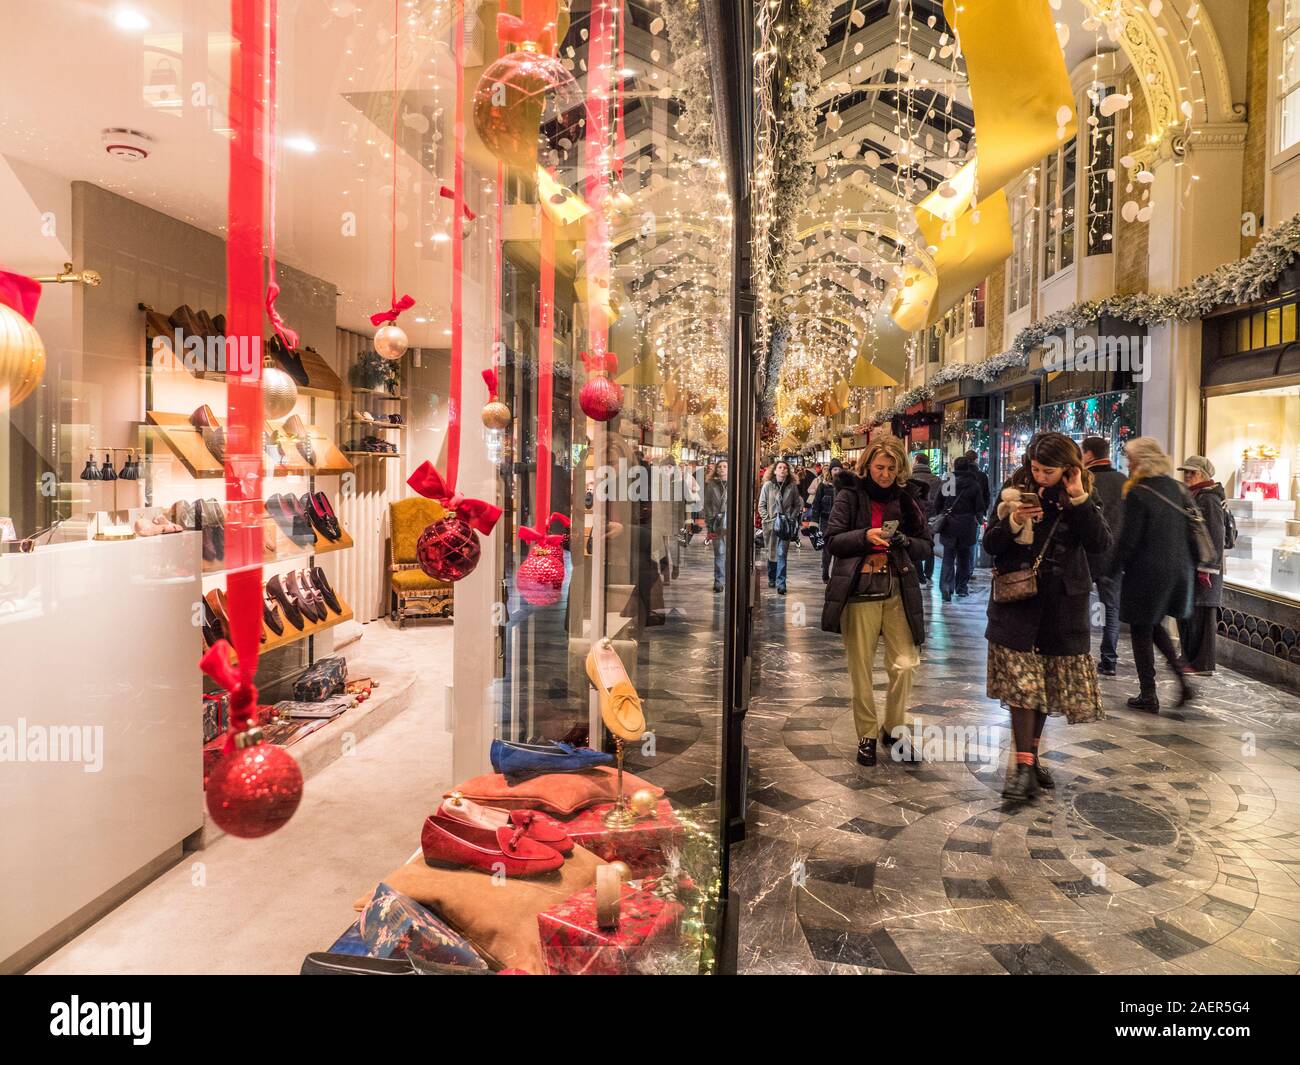 BURLINGTON  ARCADE CHRISTMAS 2019  FESTIVE WINDOW DISPLAY  SHOPPING SHOPPERS SMARTPHONES WOMEN INTERIOR charming olde worlde Burlington Arcade in its 200th year in Piccadilly with traditional Christmas decorations and shoppers London UK Stock Photo